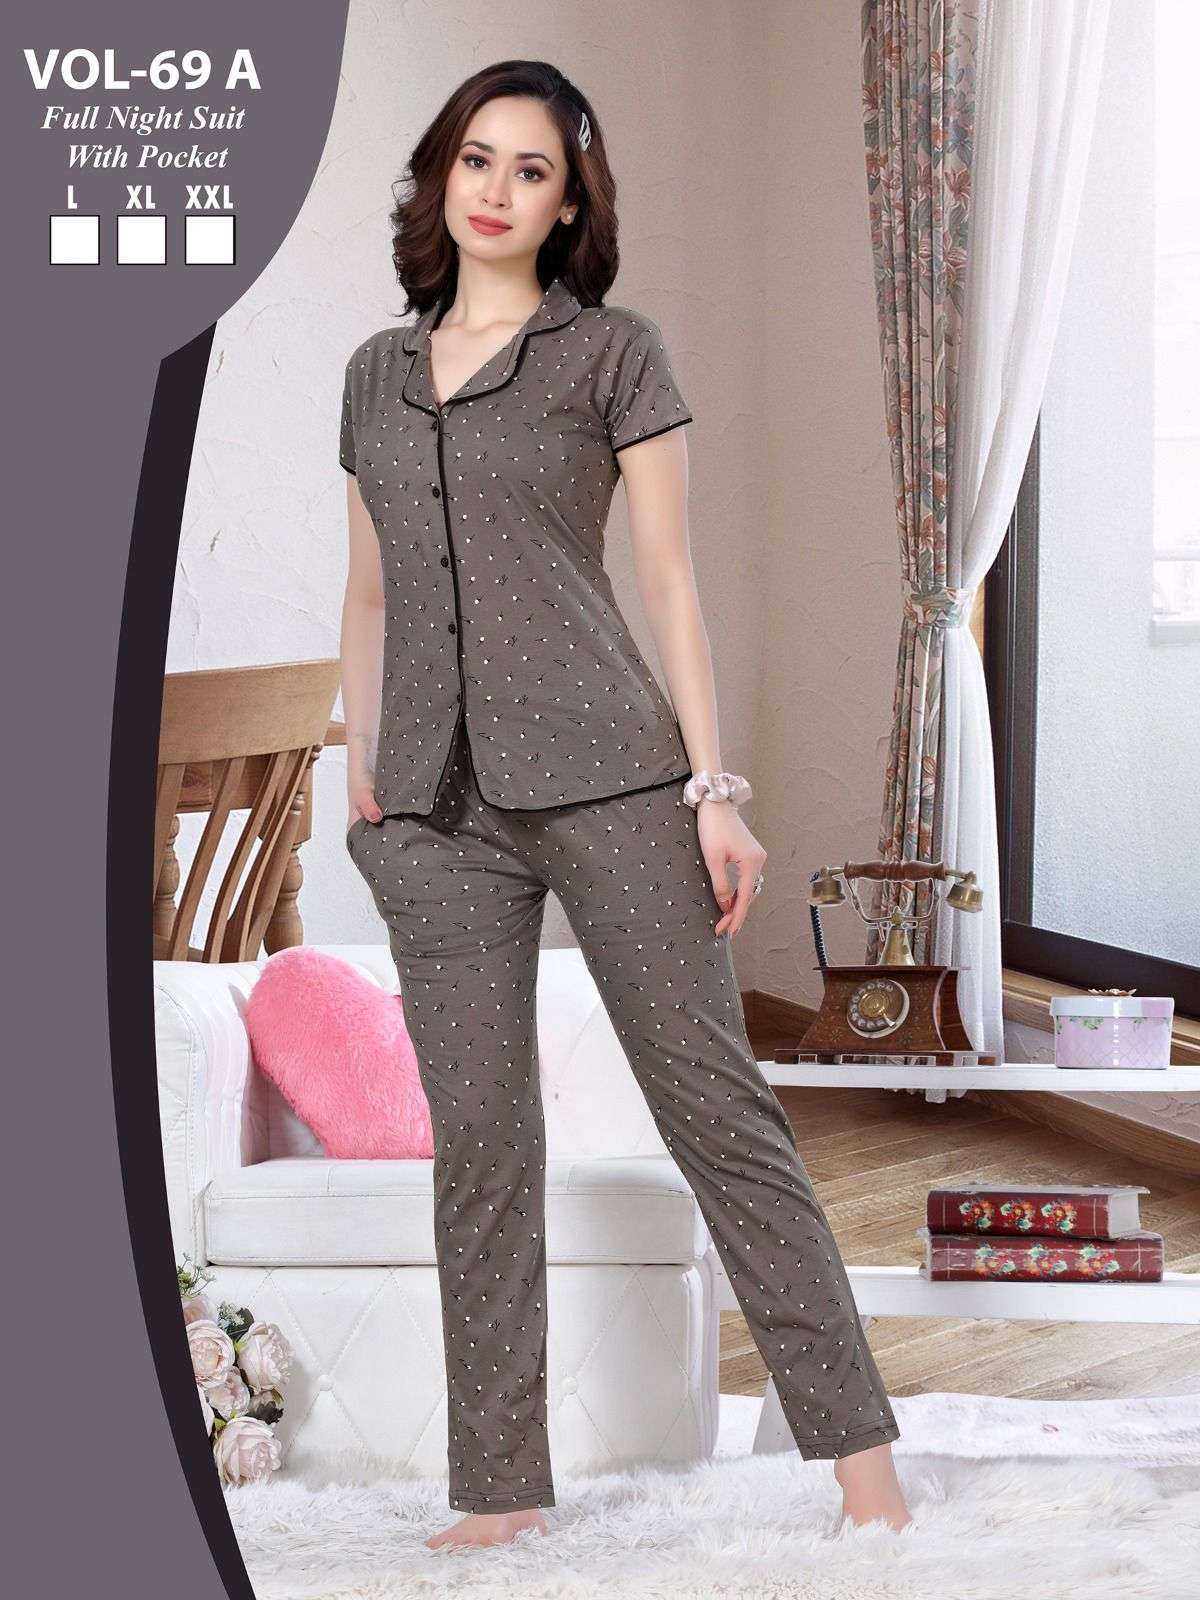 PLATINUM C.NS VOL.69 A Heavy Shinker Hosiery Cotton Collar Night Suits With Pocket CATALOG WHOLESALER BEST RATE